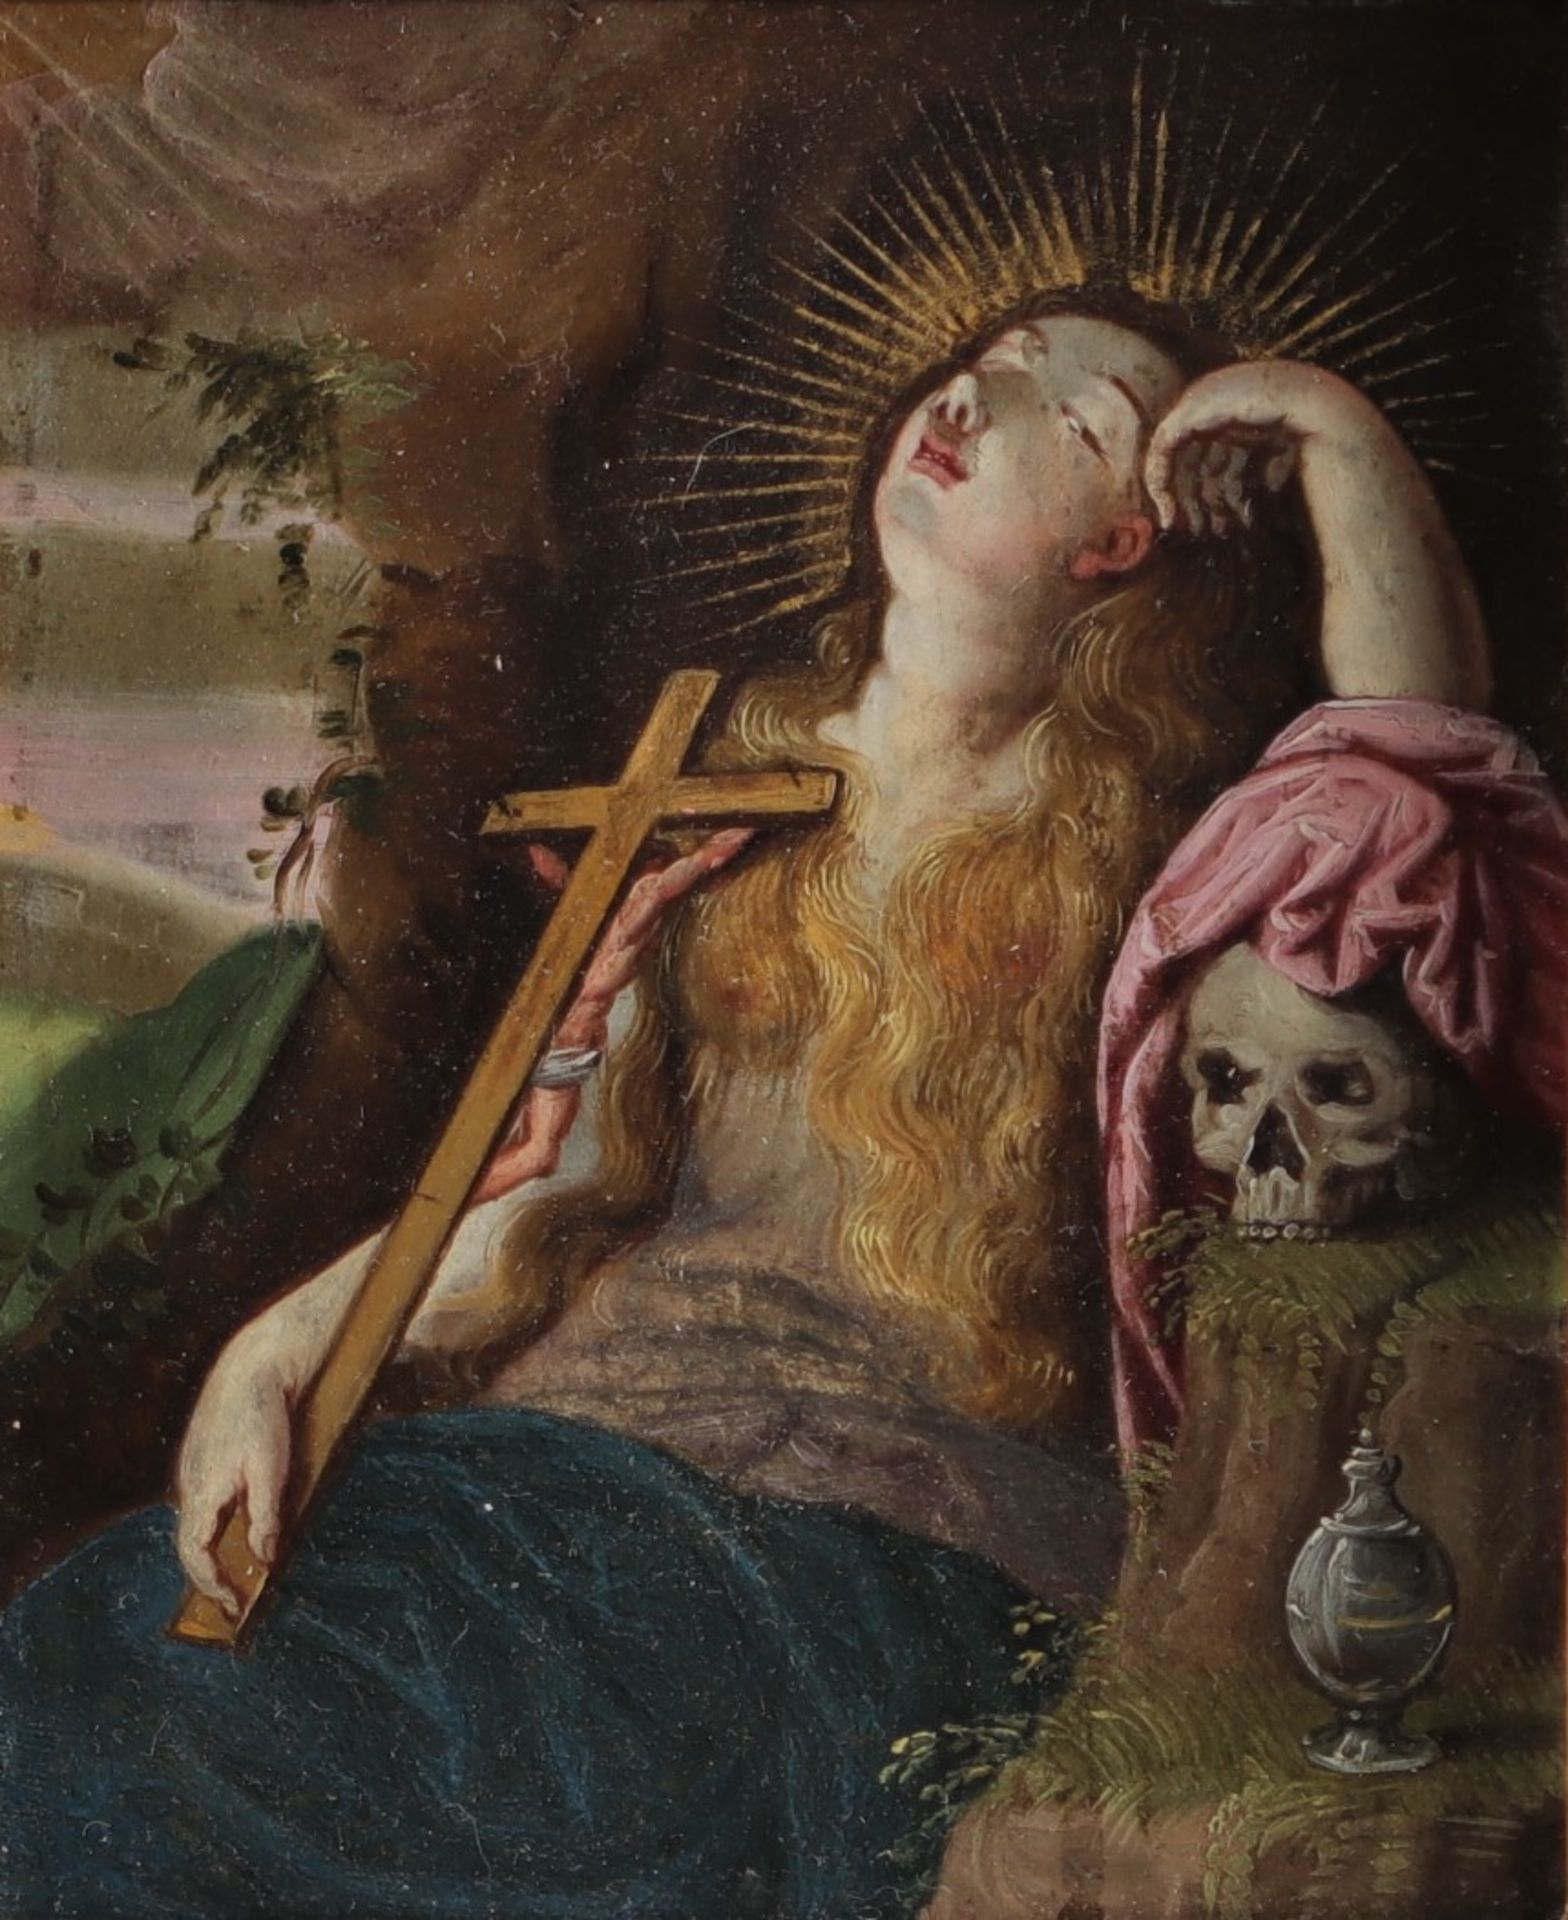 Oil on copper "Mary Magdalene" from 17th century